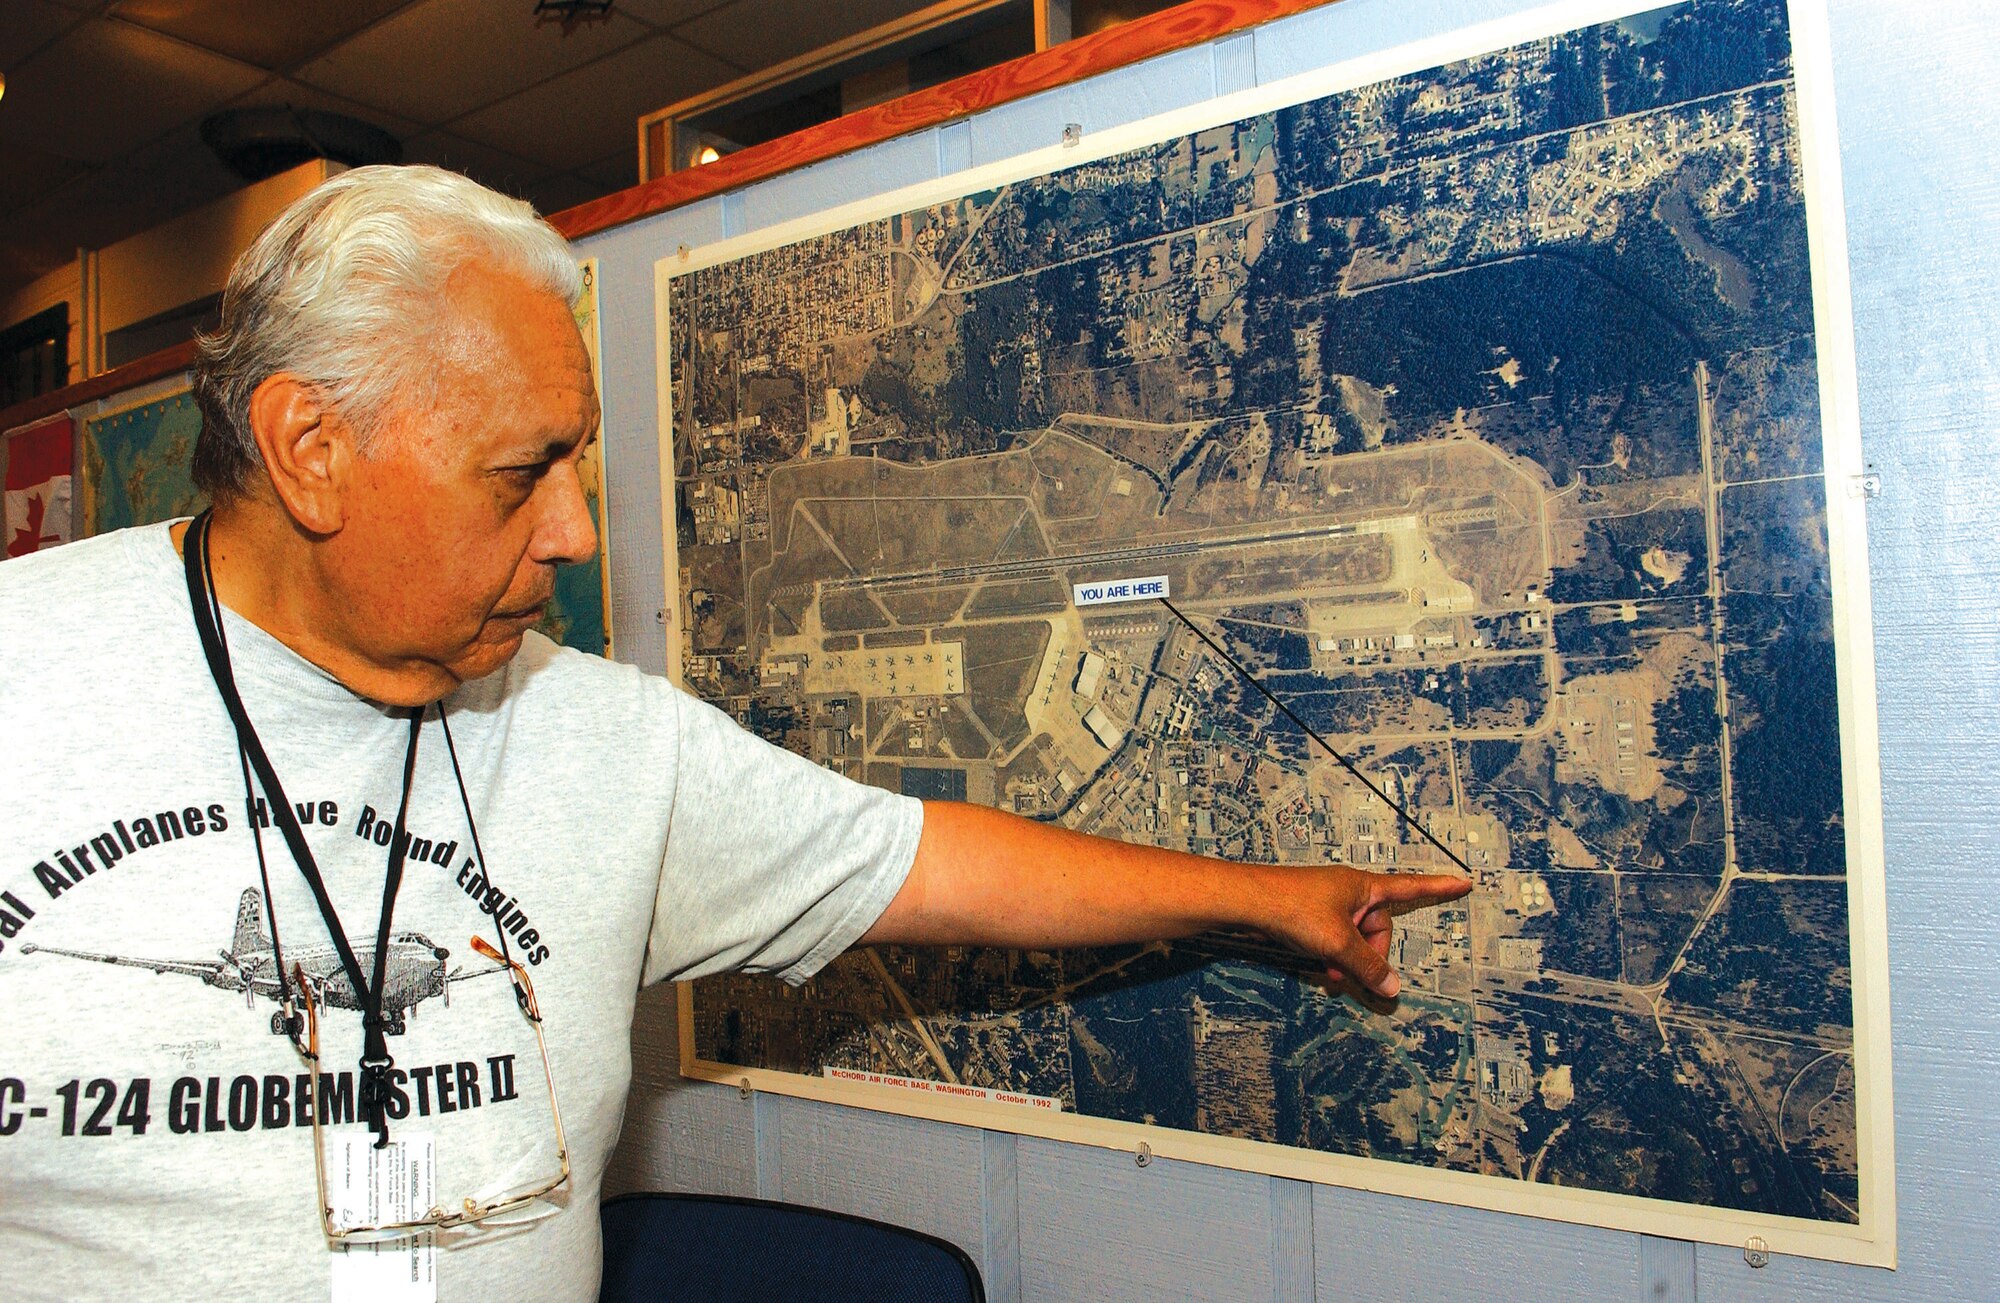 MCCHORD AIR FORCE BASE, Wash. —
Museum volunteer Ed Baker highlights an aerial map of McChord. Mr. Baker has been involved with the museum since 1983. U.S. Air Force/Photo by Abner Guzman

